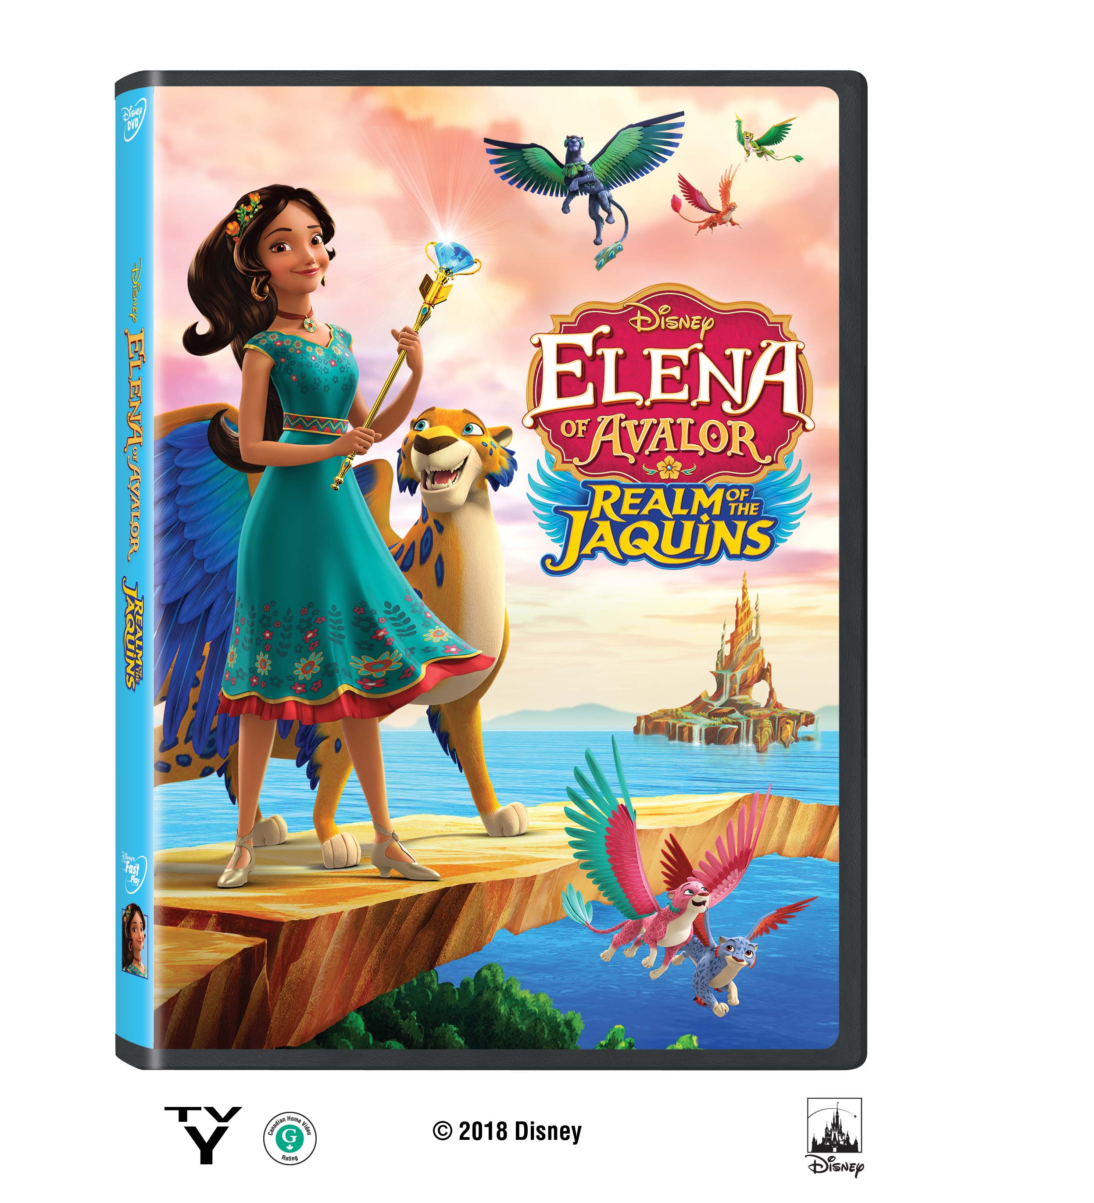 Elena of Avalor: Realm of the Jaquins on Disney DVD